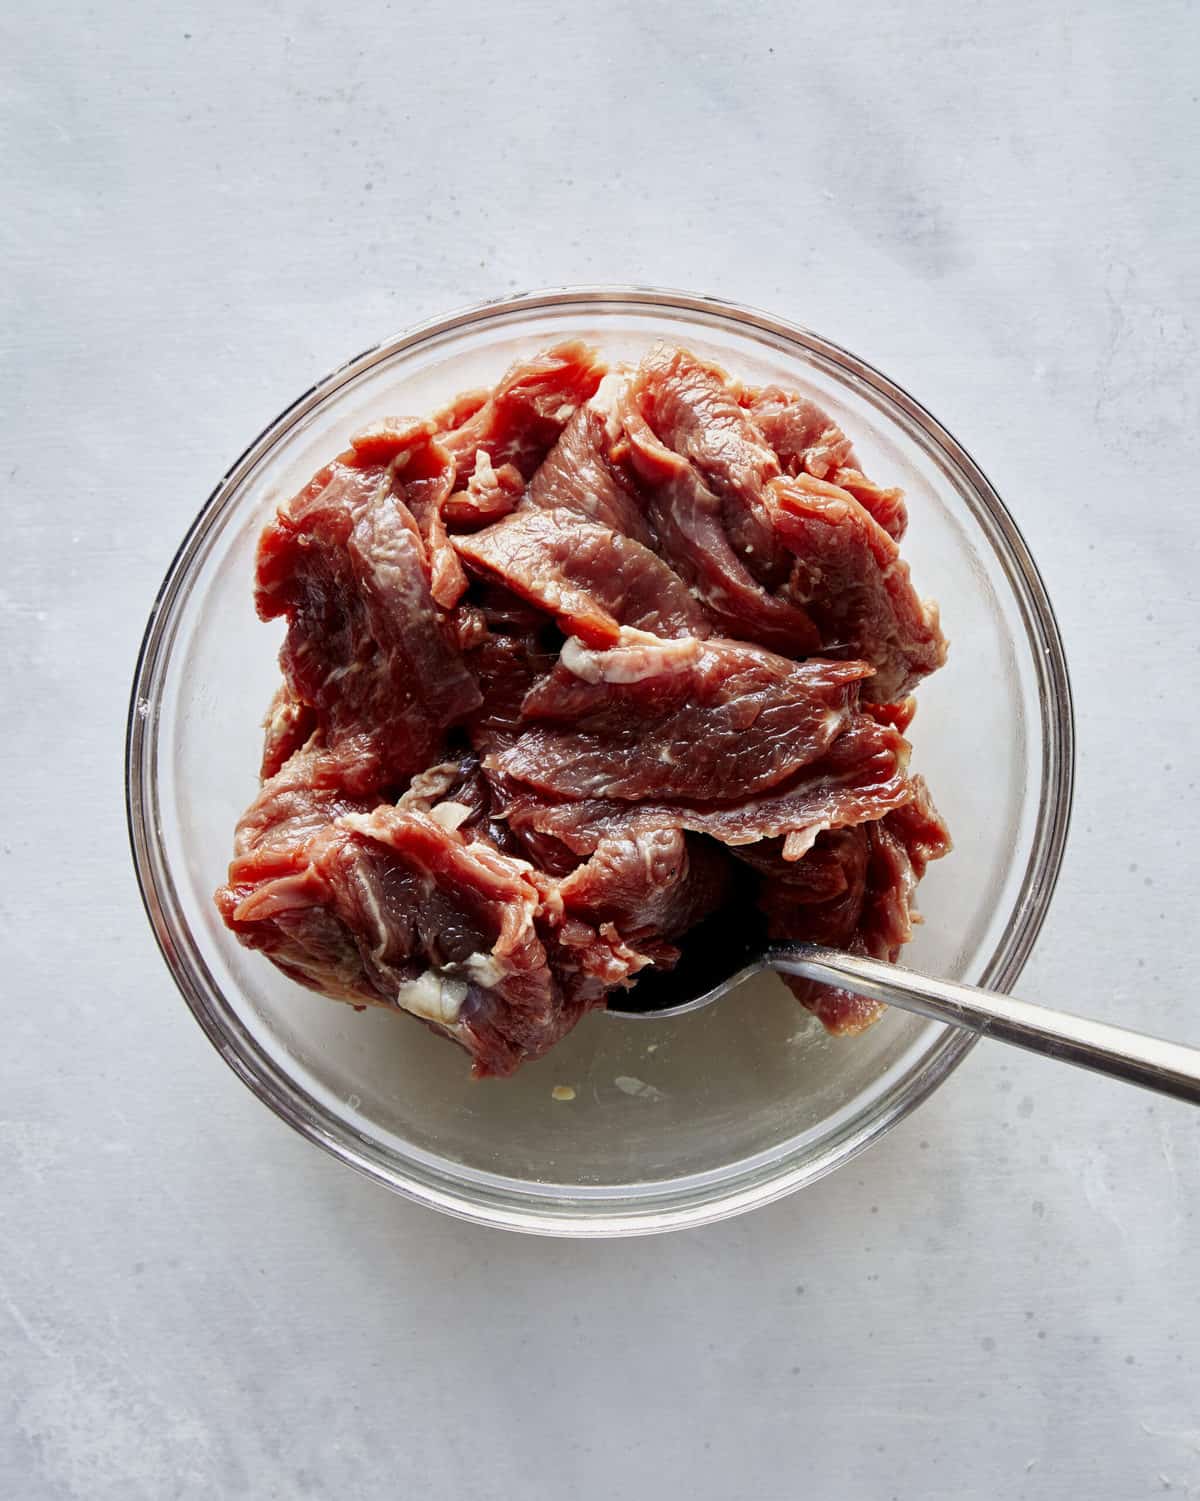 Let beef marinate in a glass bowl.